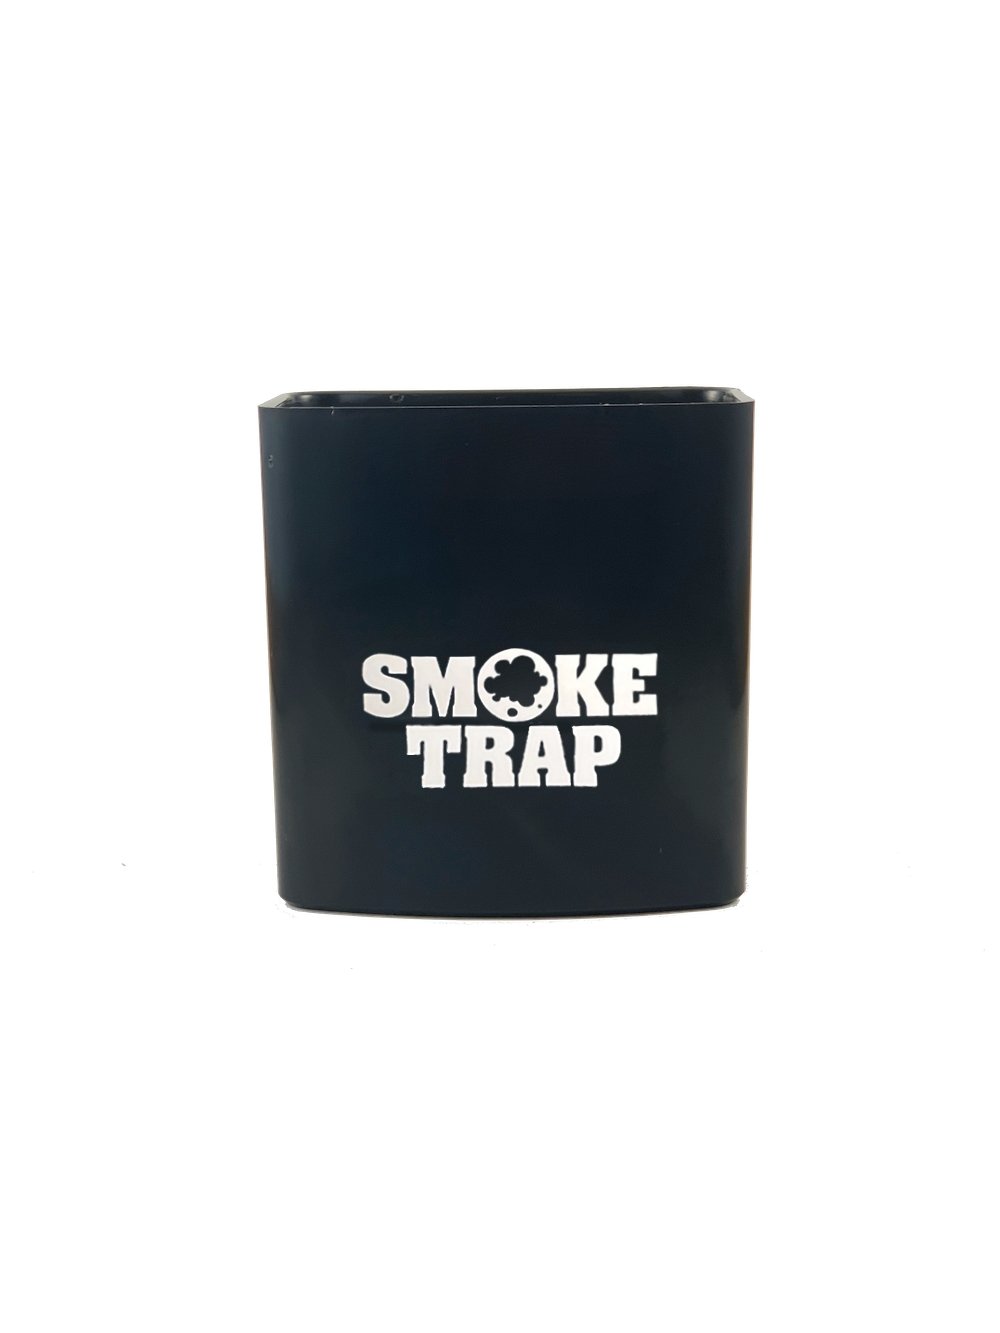 Smoke Trap 2.0 - Personal Air Filter (Sploof) - Smoke Filter with  Replaceable Filter - 300+ Uses (Black) 